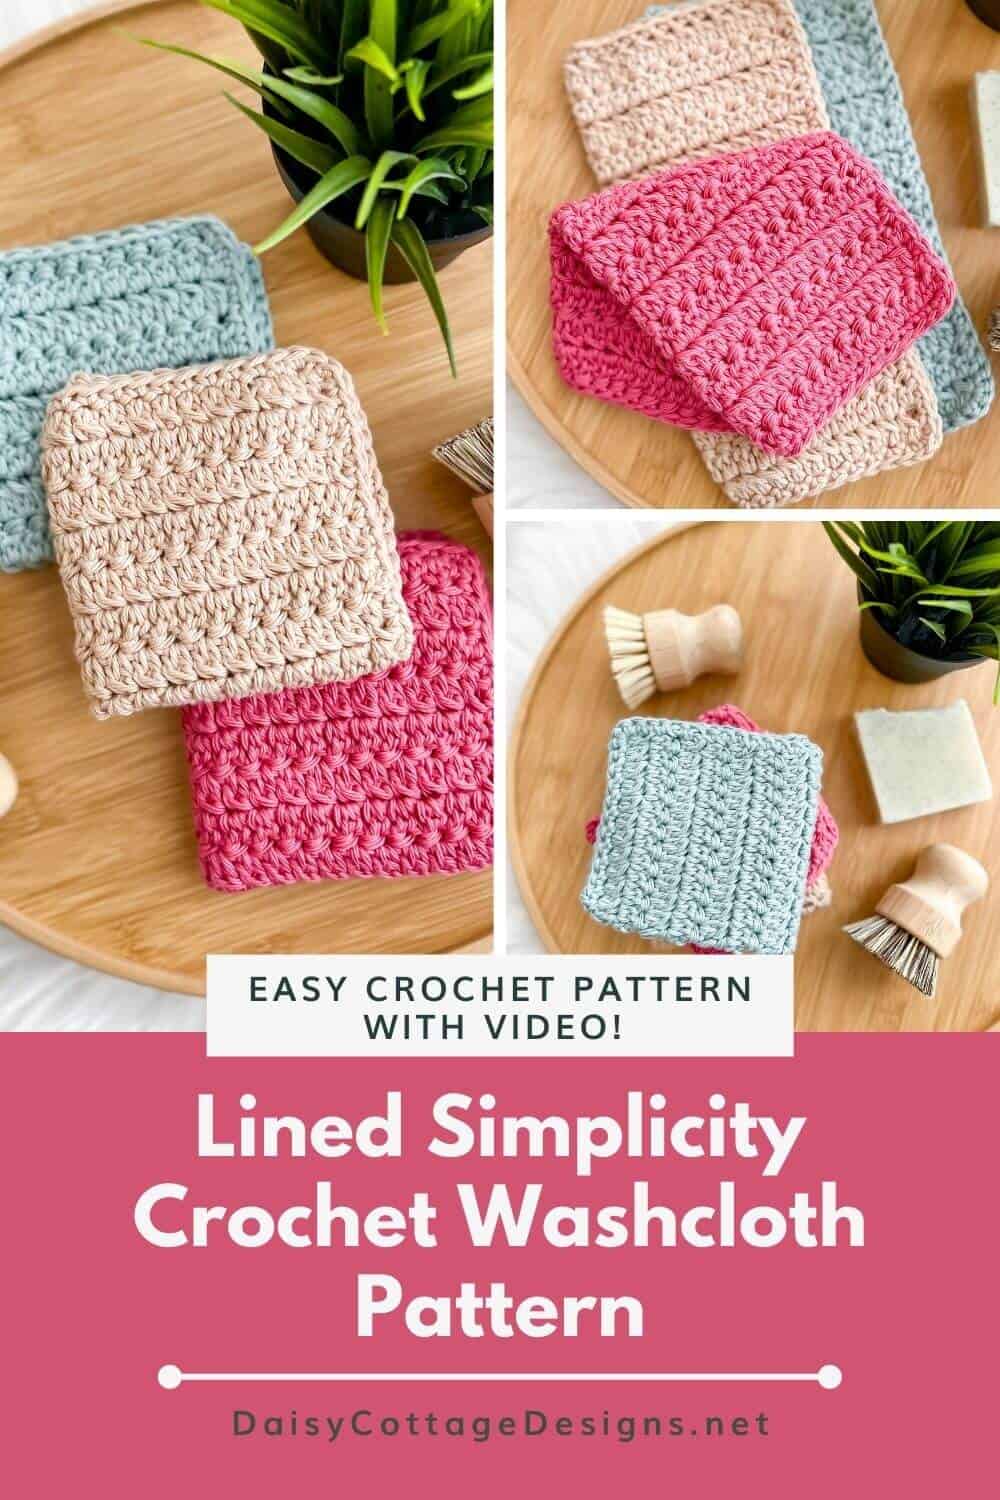 Use this simple crochet dishcloth pattern to create a beautifully textured cloth for your bathroom or kitchen.  